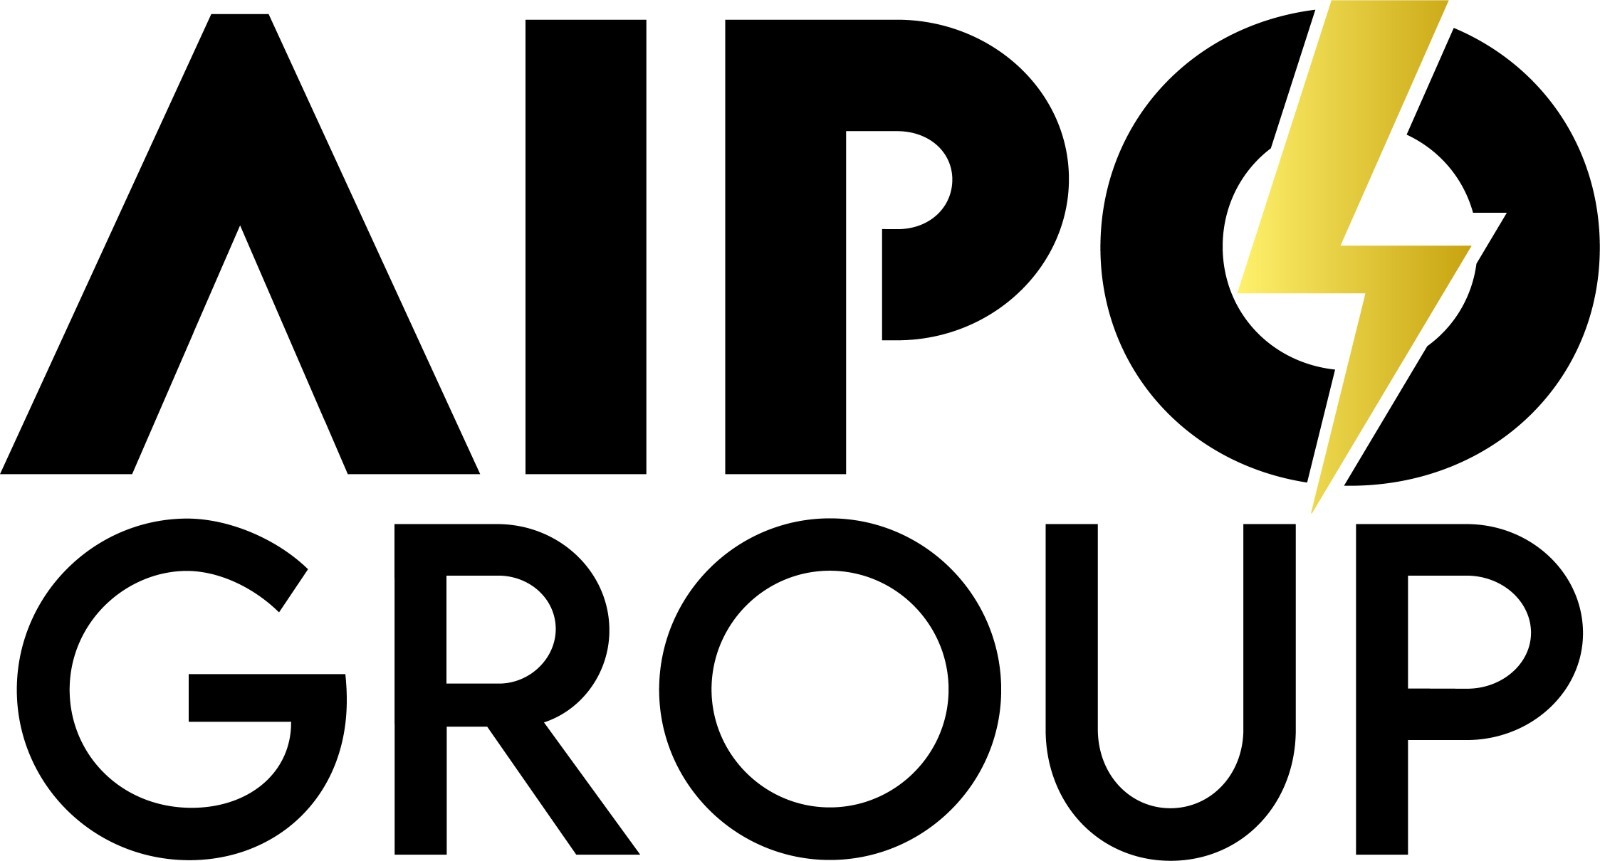 AIPO GROUP